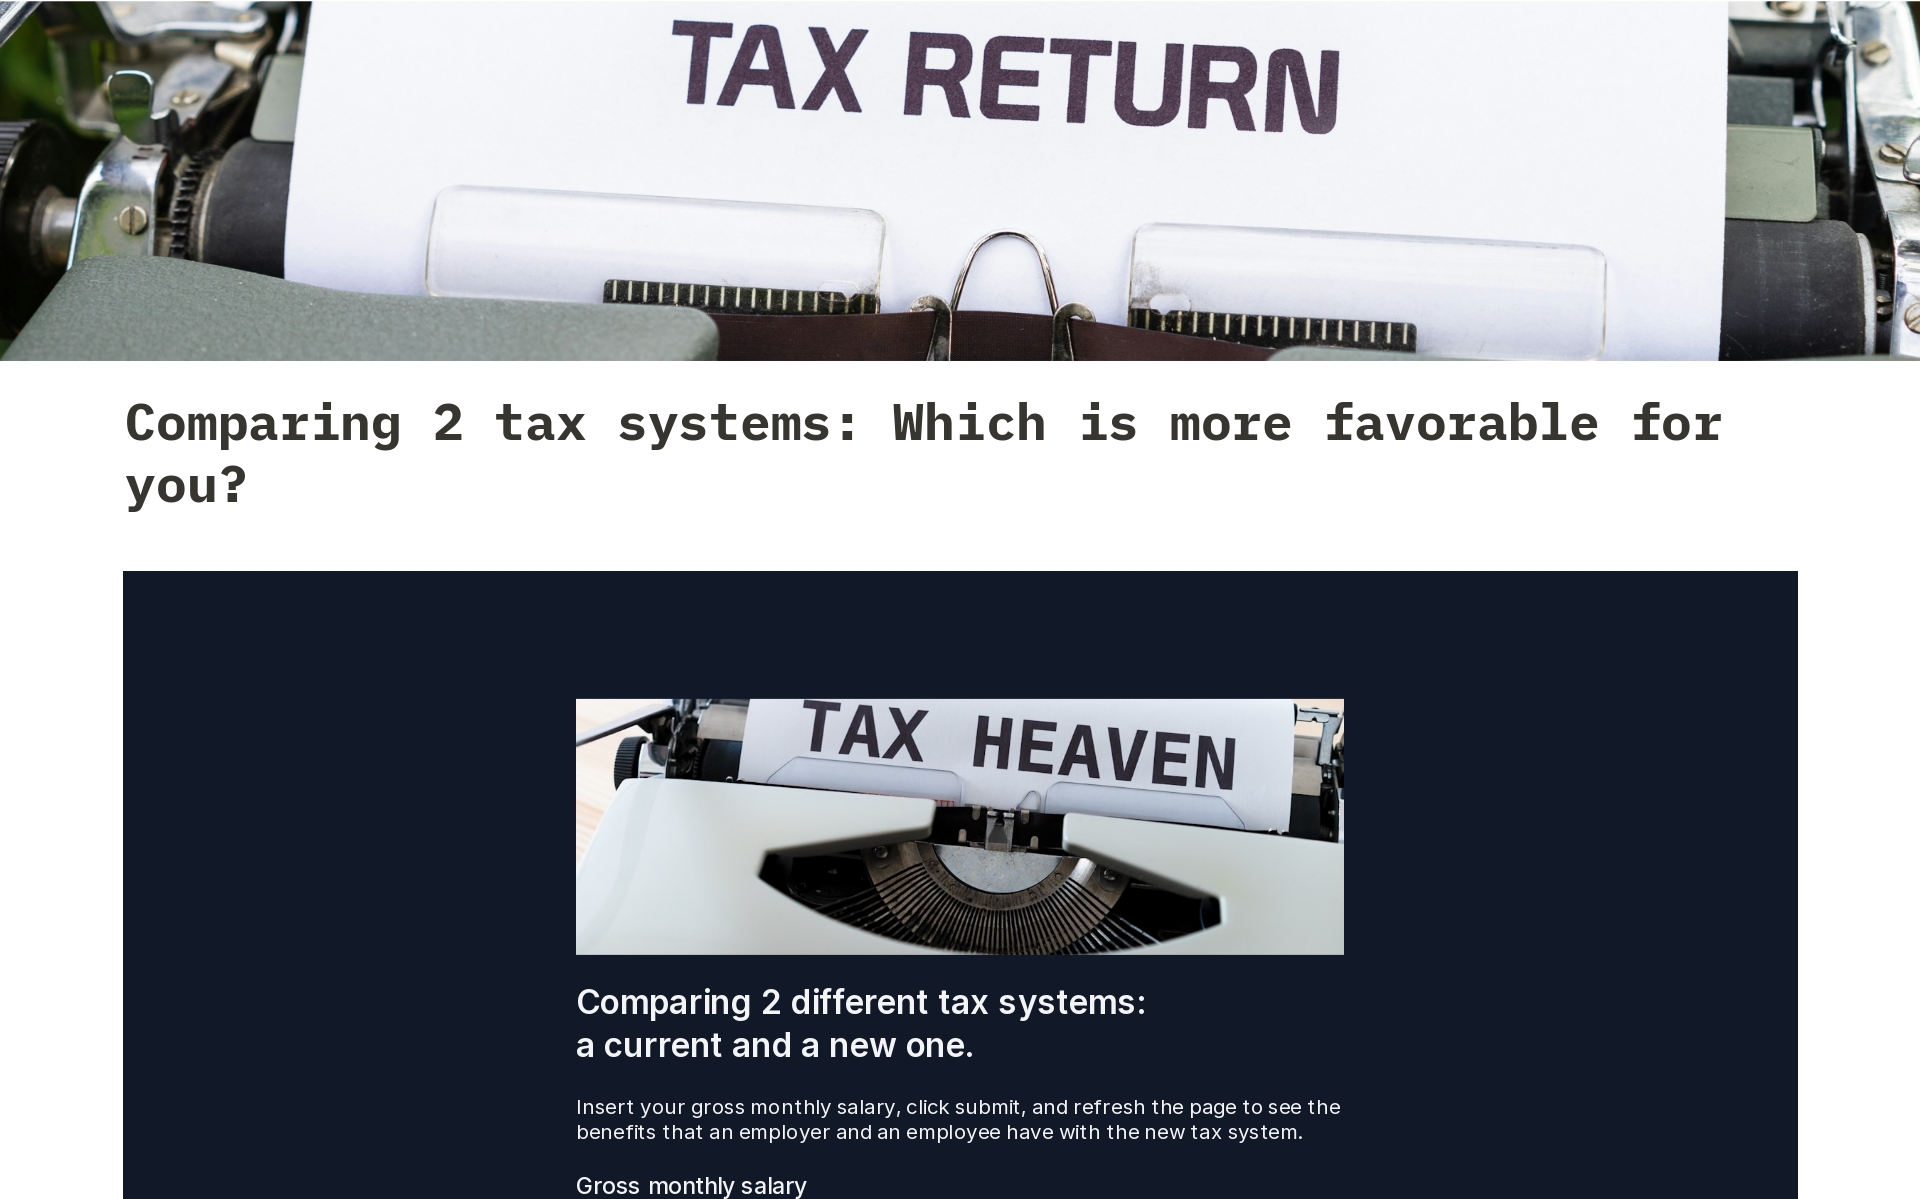 Comparing 2 tax systems: a current and a new one님의 템플릿 미리보기